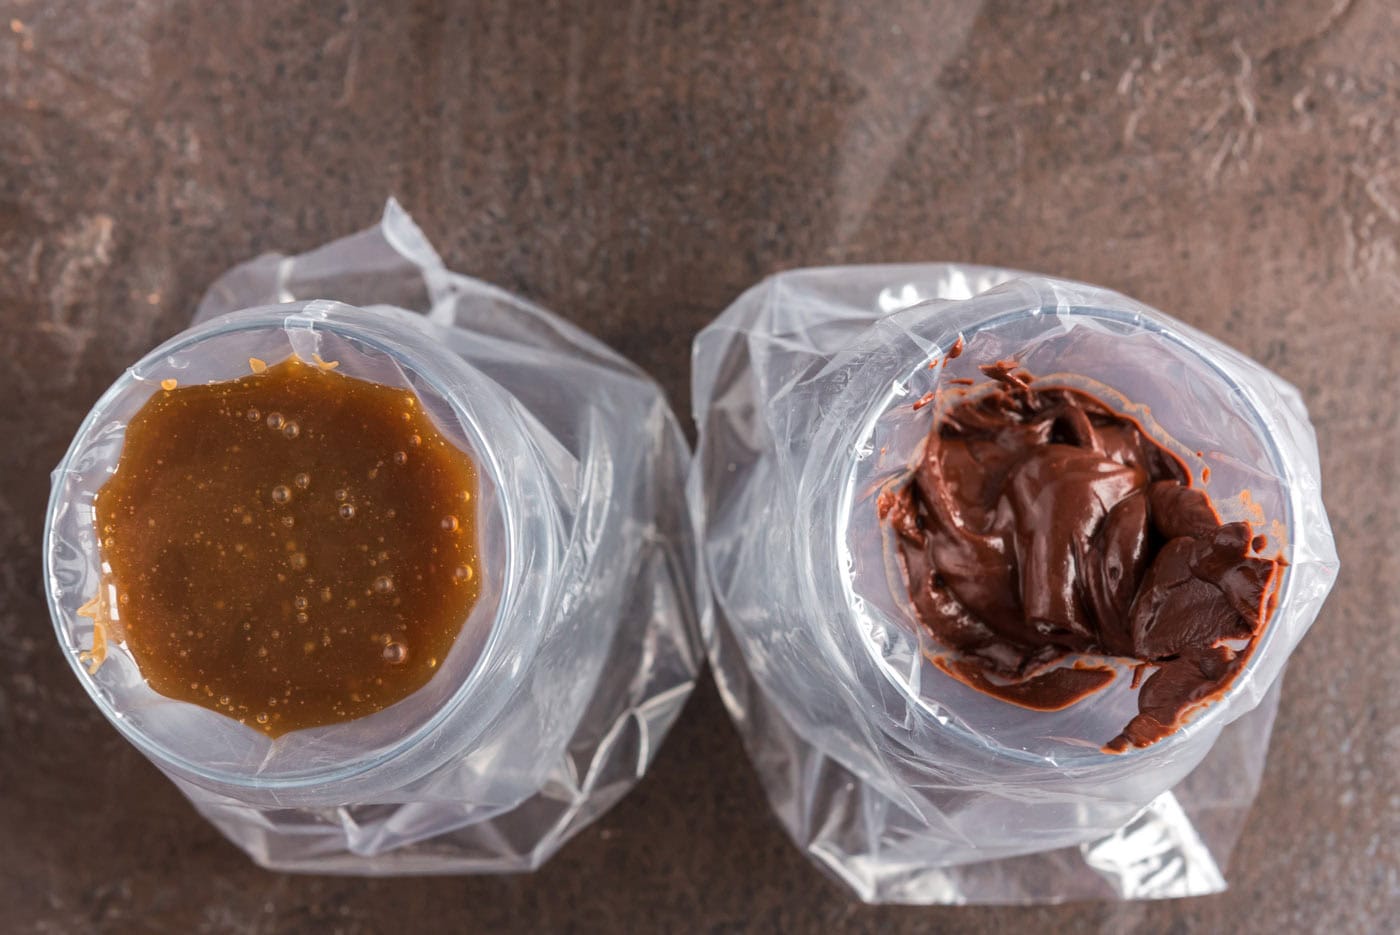 caramel and chocolate in baggies